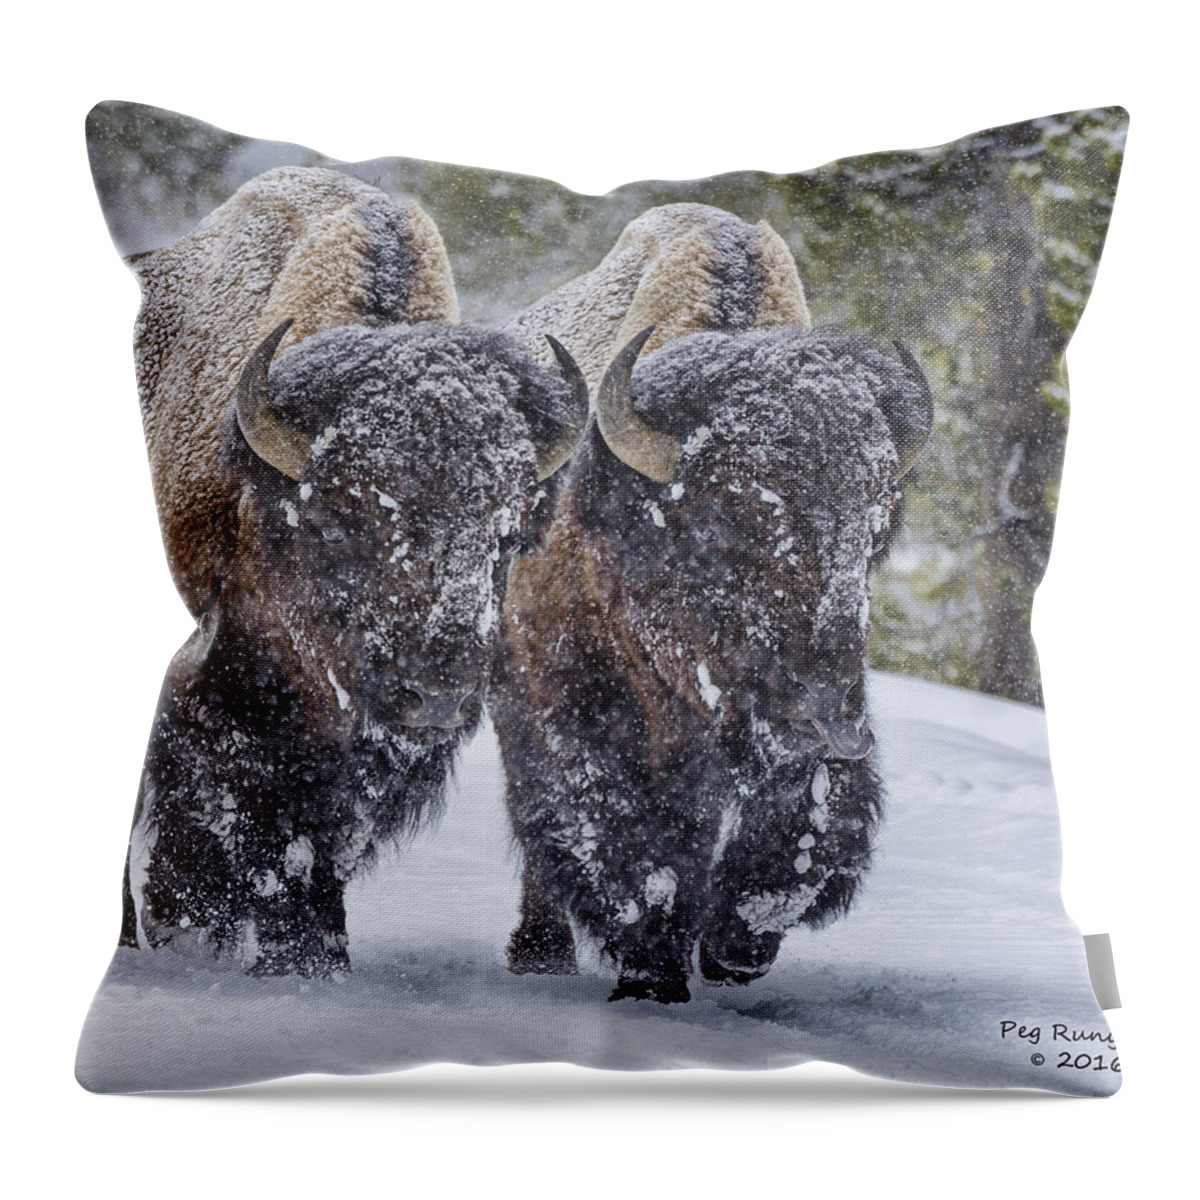 Bison Throw Pillow featuring the photograph Bison Buddies by Peg Runyan